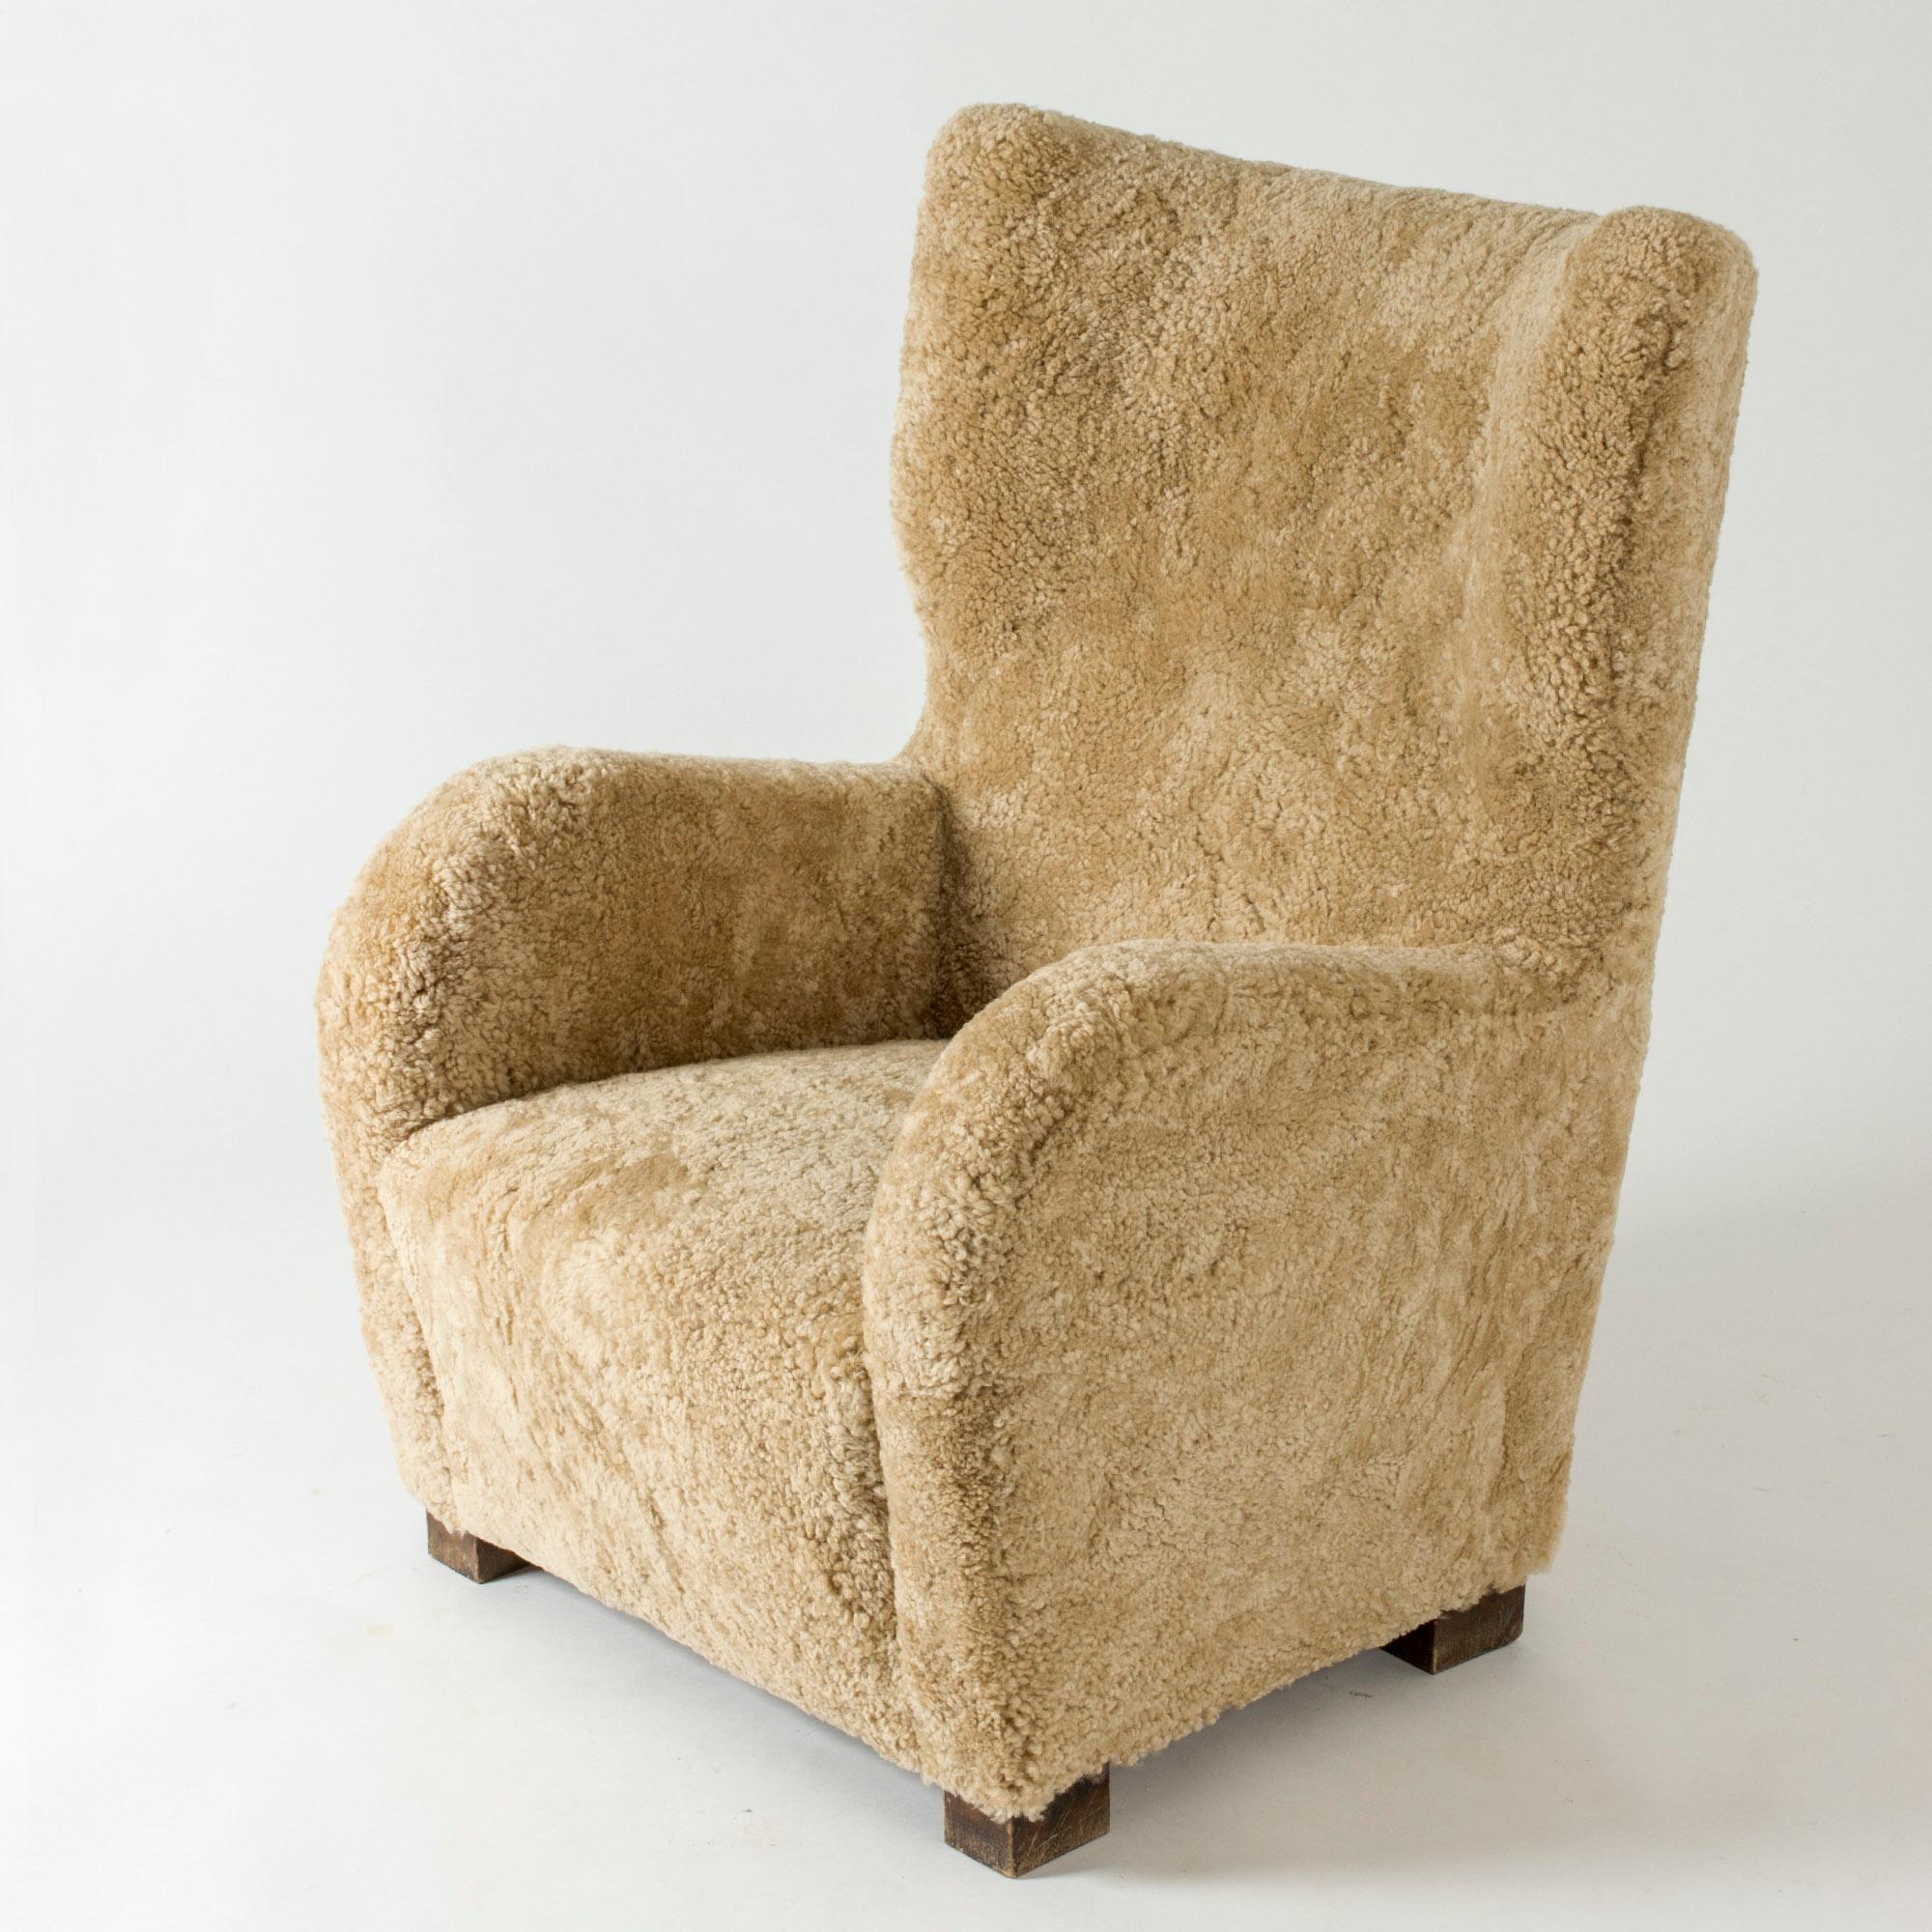 Amazing Swedish 1930s lounge chair in an oversized design with clean lines. Upholstered with sheepskin in a warm nuance, enhancing the inviting look of the chair.